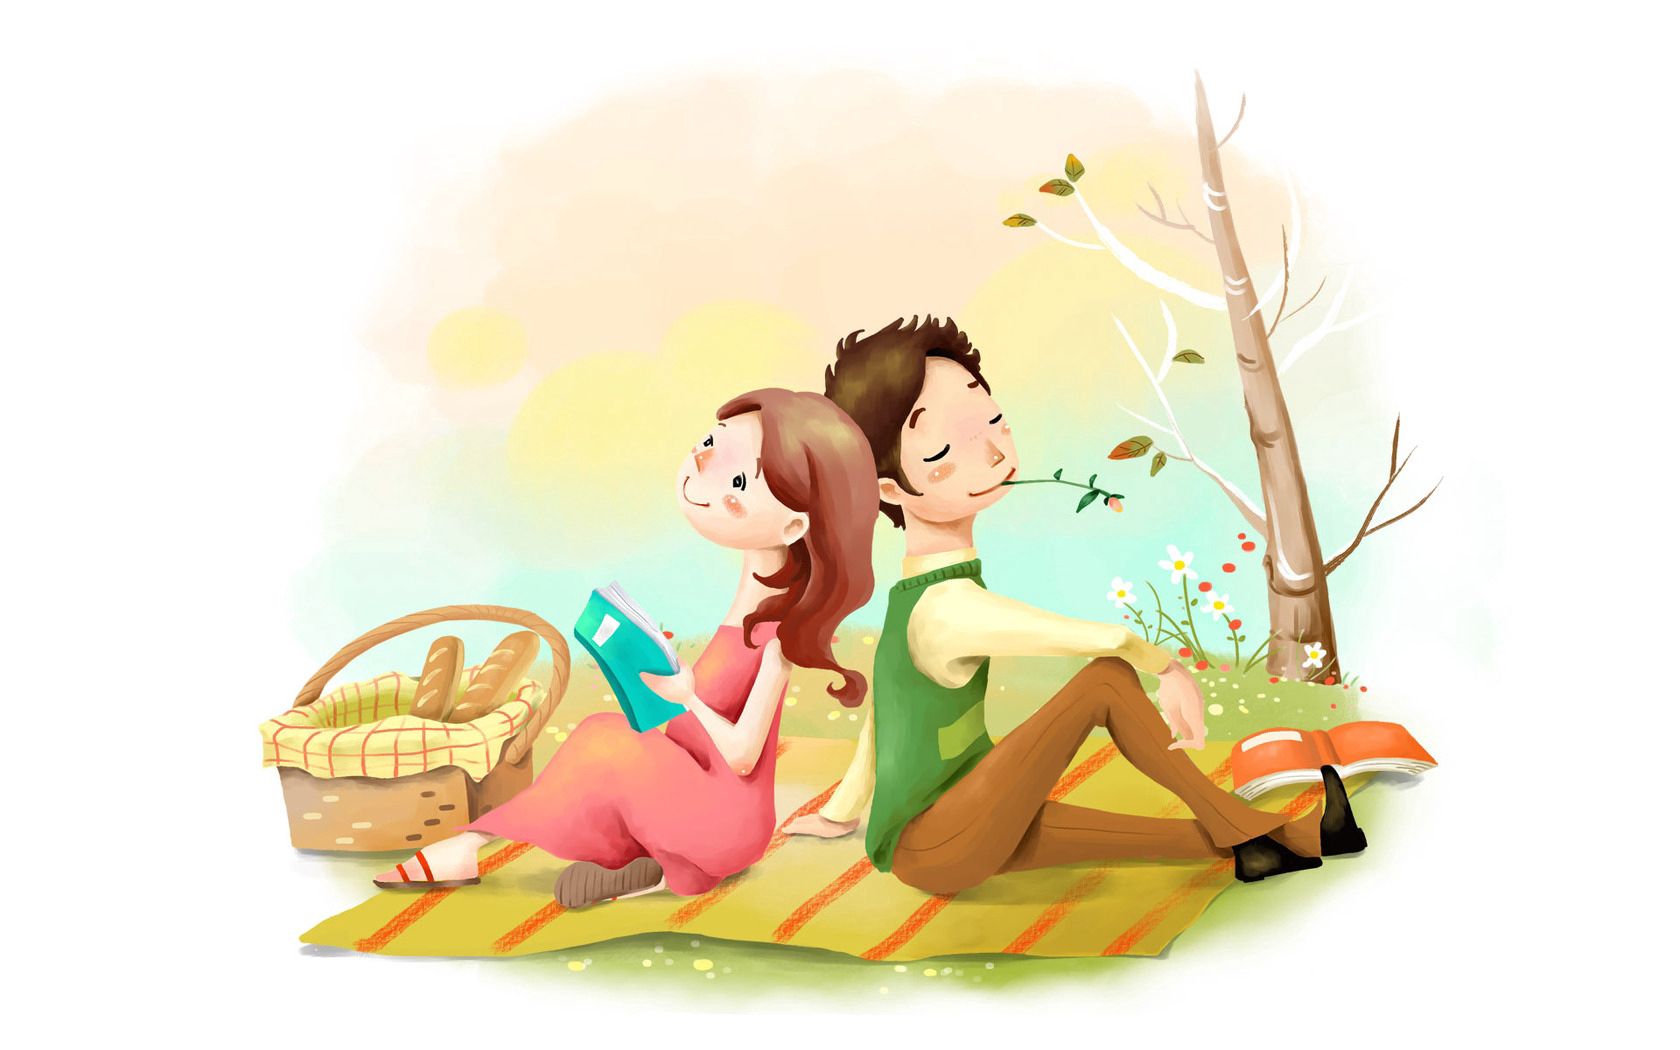 guy, love, drawing, girl, flowers, picture, basket, lawn, positive, bread, picnic, reverie, dreaminess Full HD